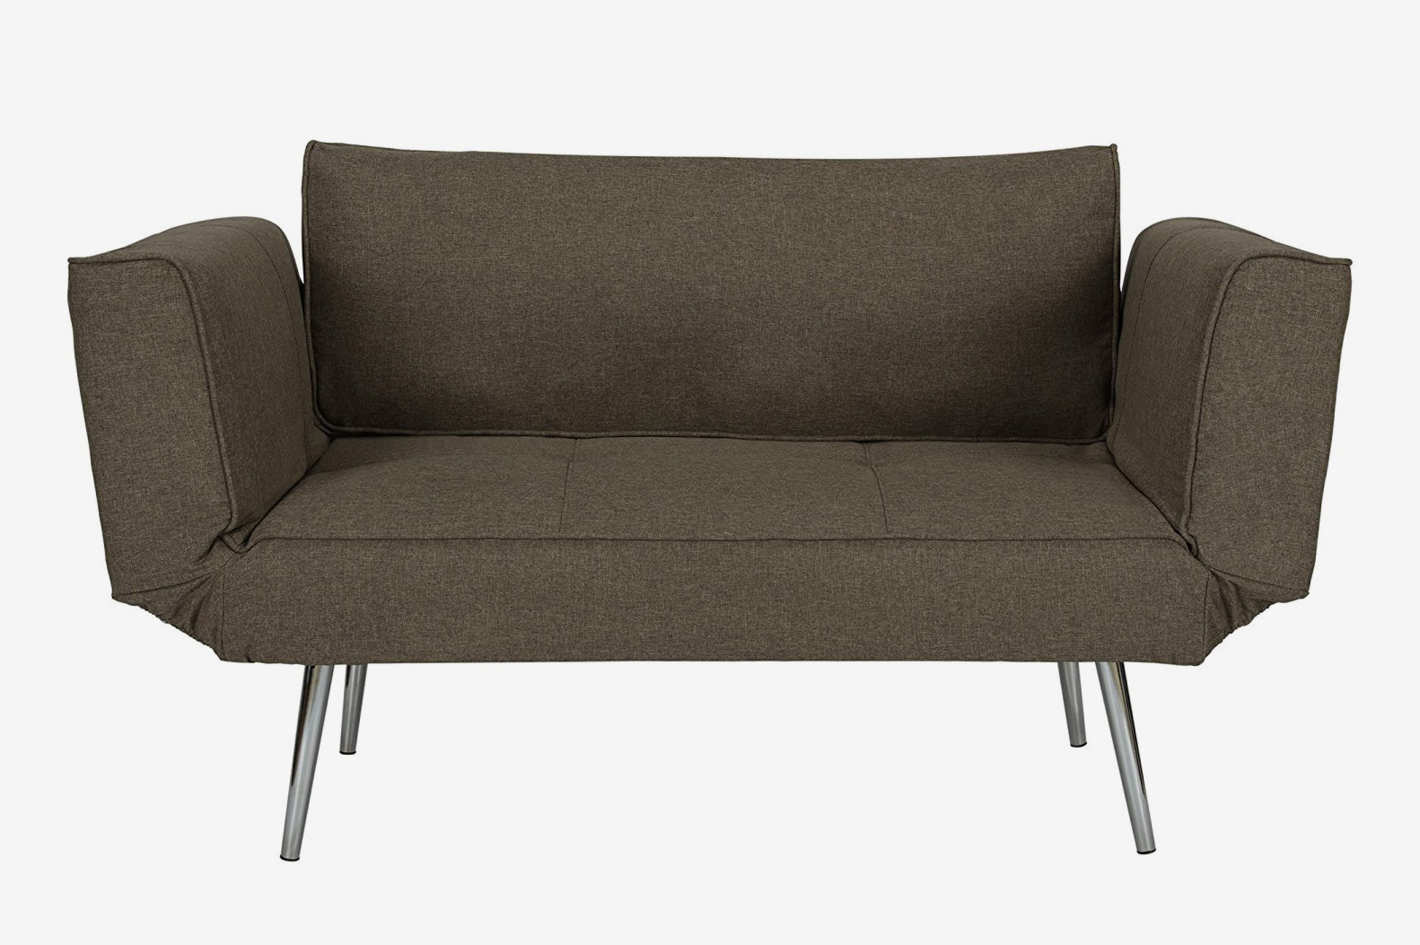 DHP Euro Sofa Futon Loveseat With Chrome Legs and Adjustable Armrests